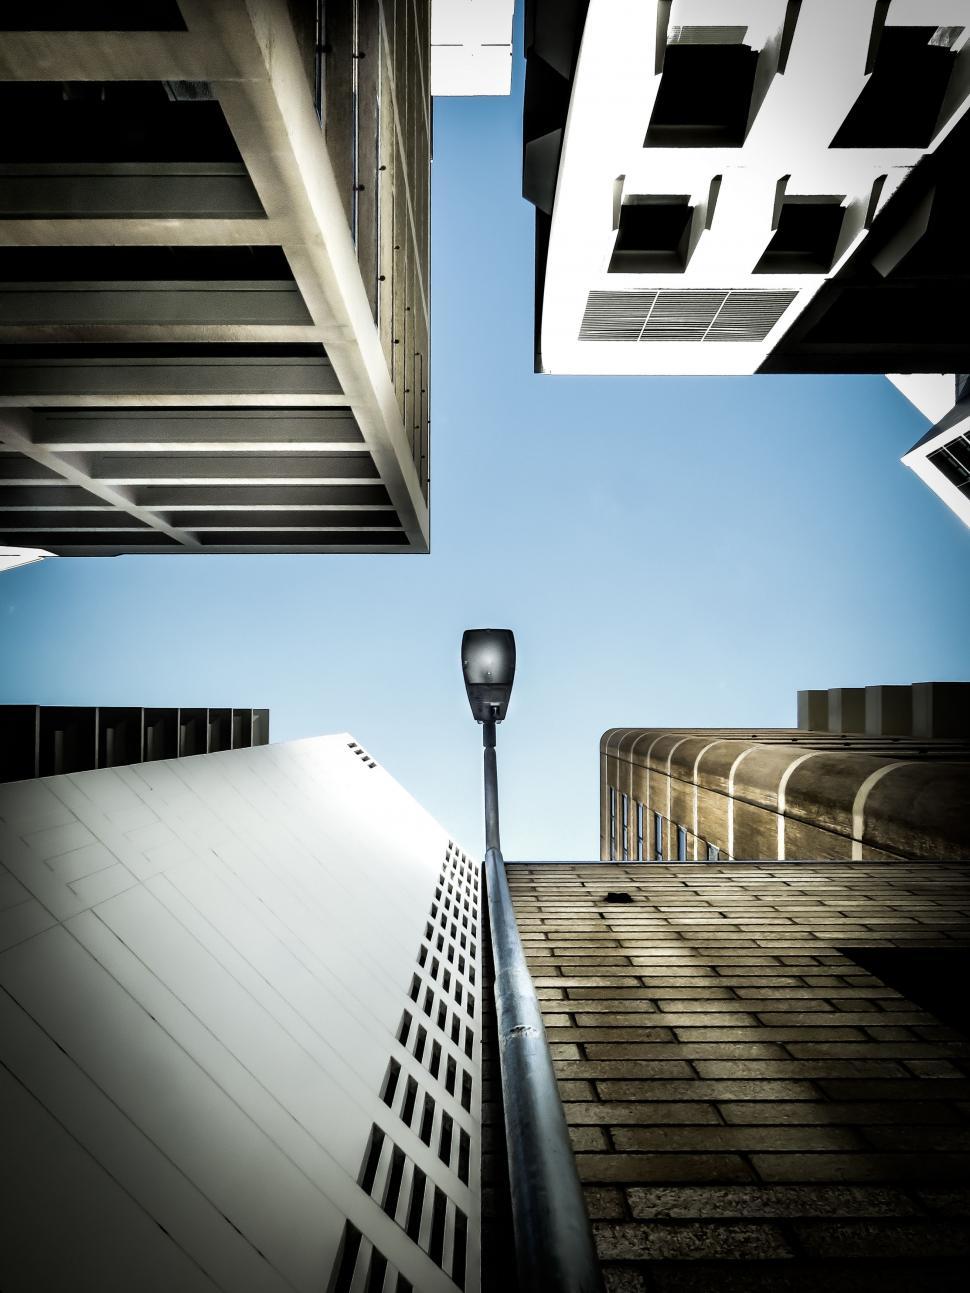 Free Image of Tall Building With Street Light 